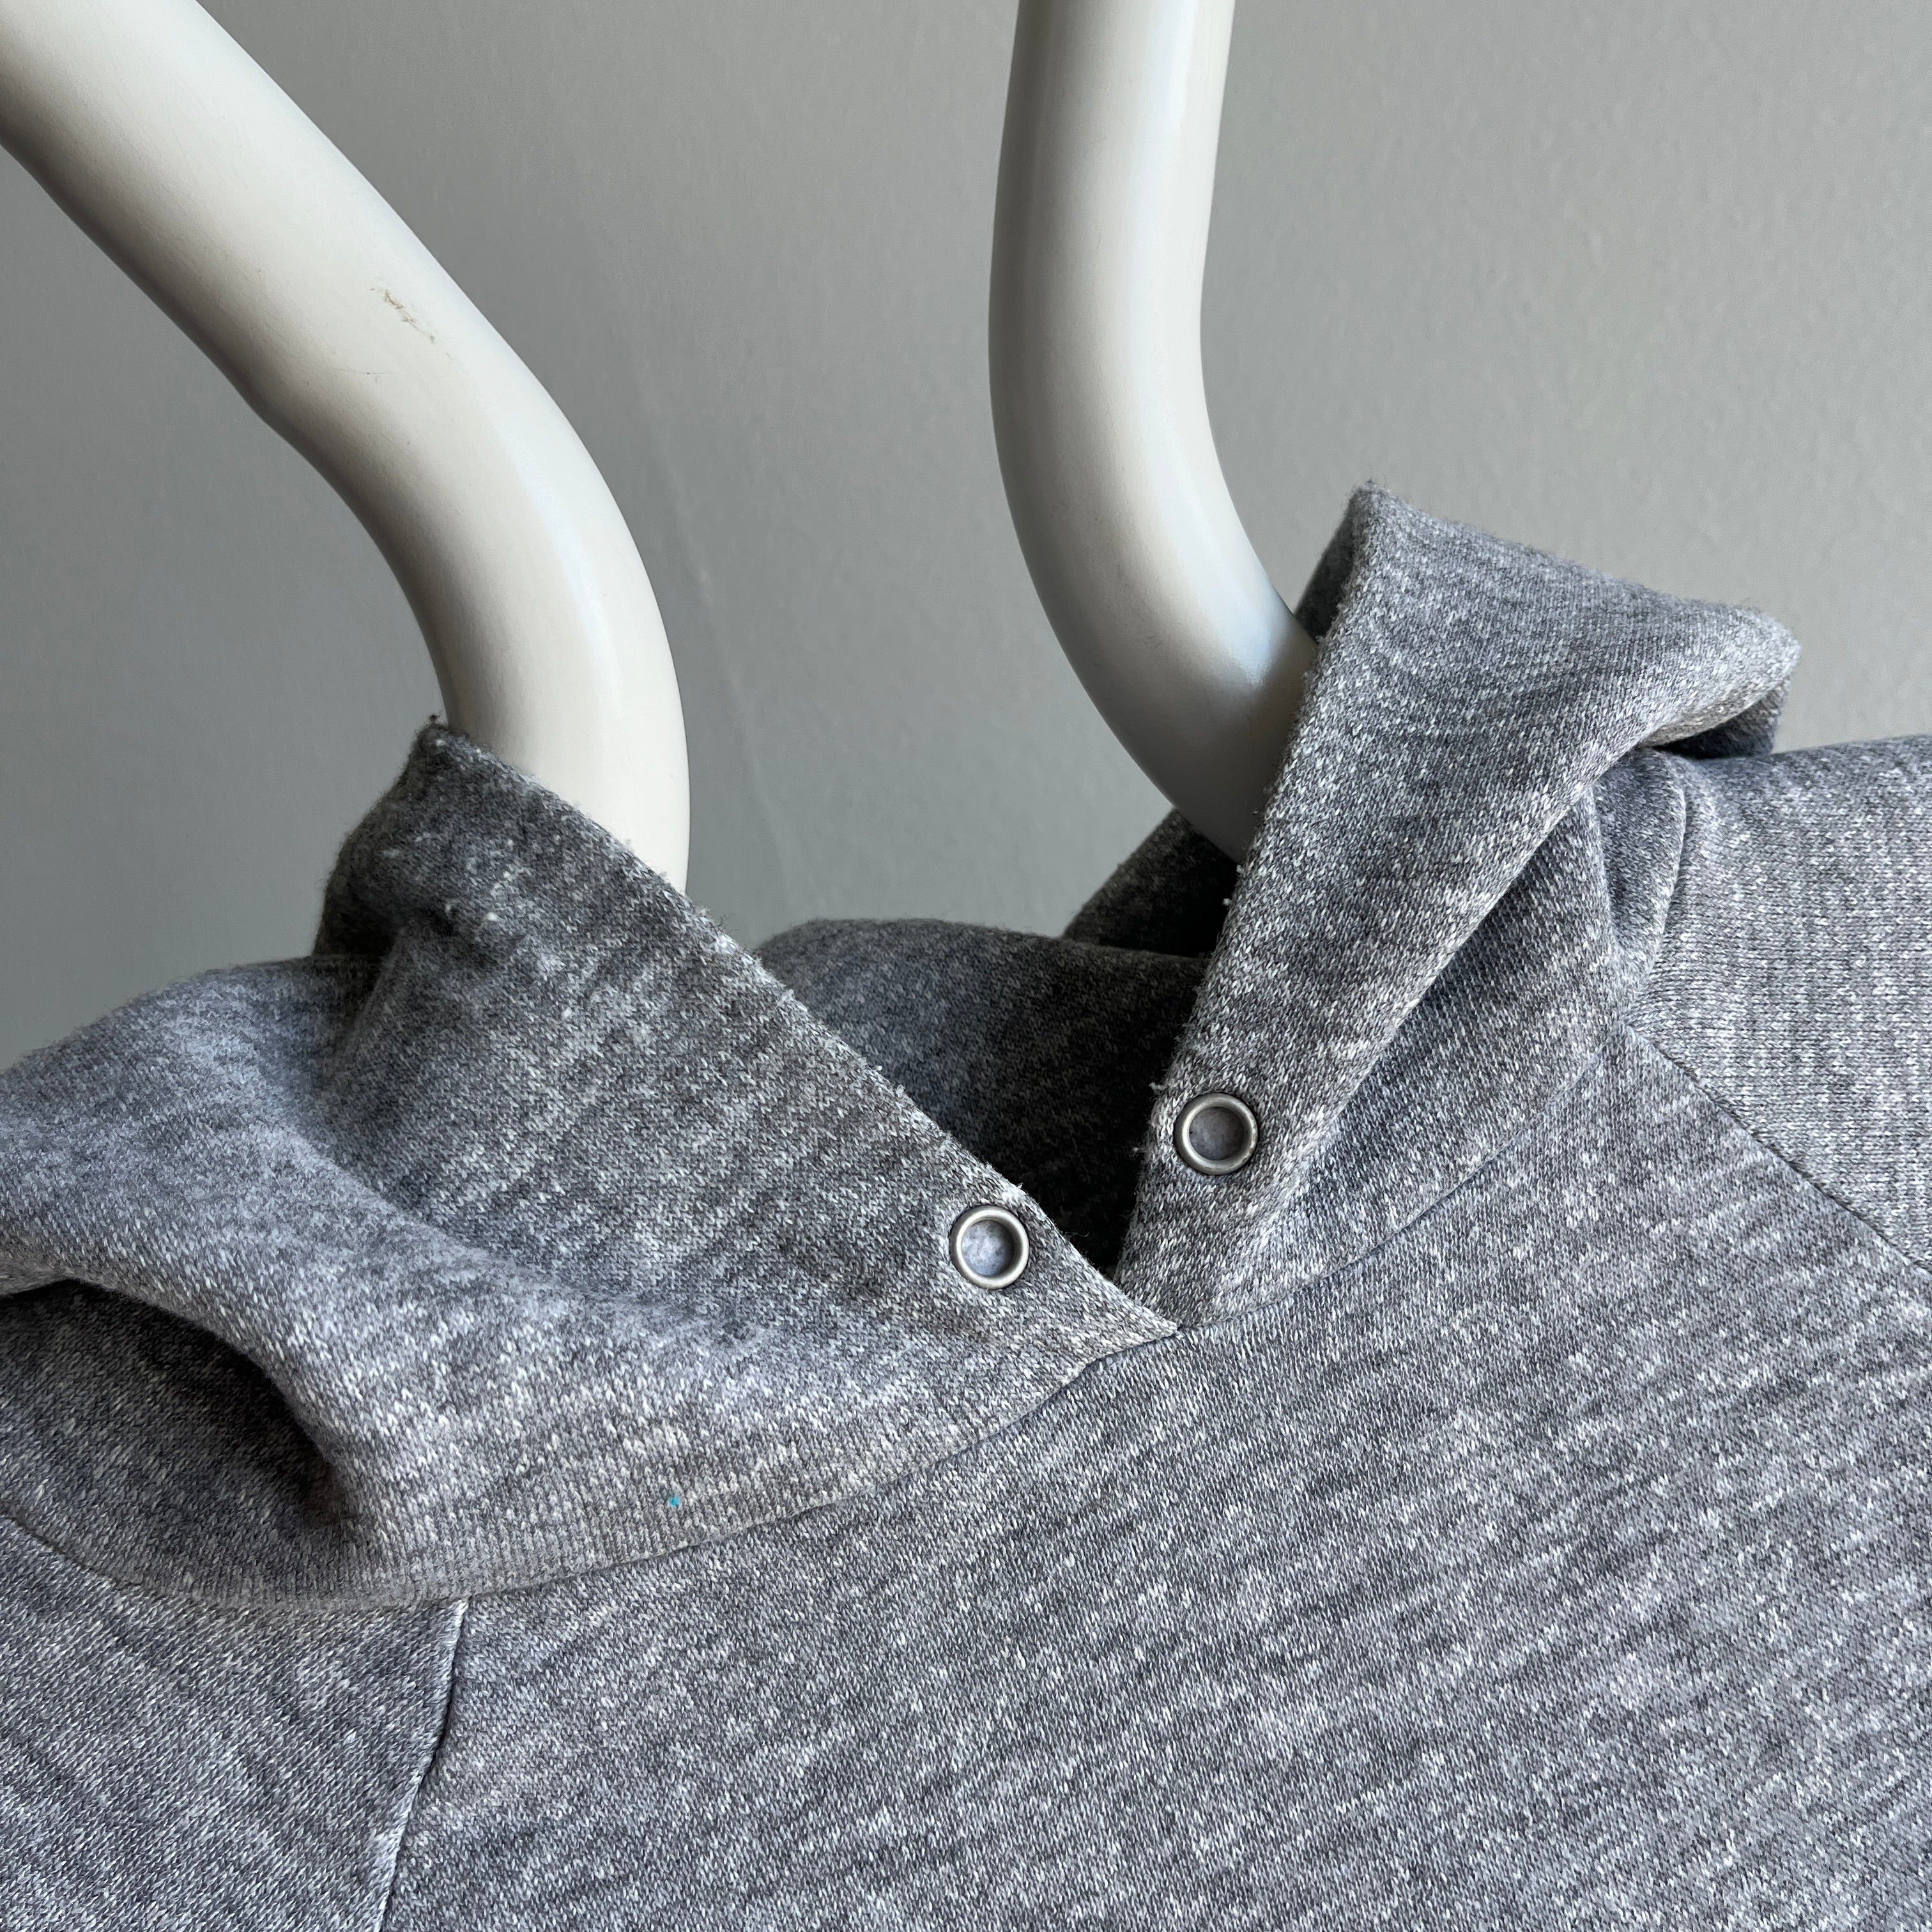 1980s The Fitness Center Blank Gray Pull Over Hoodie